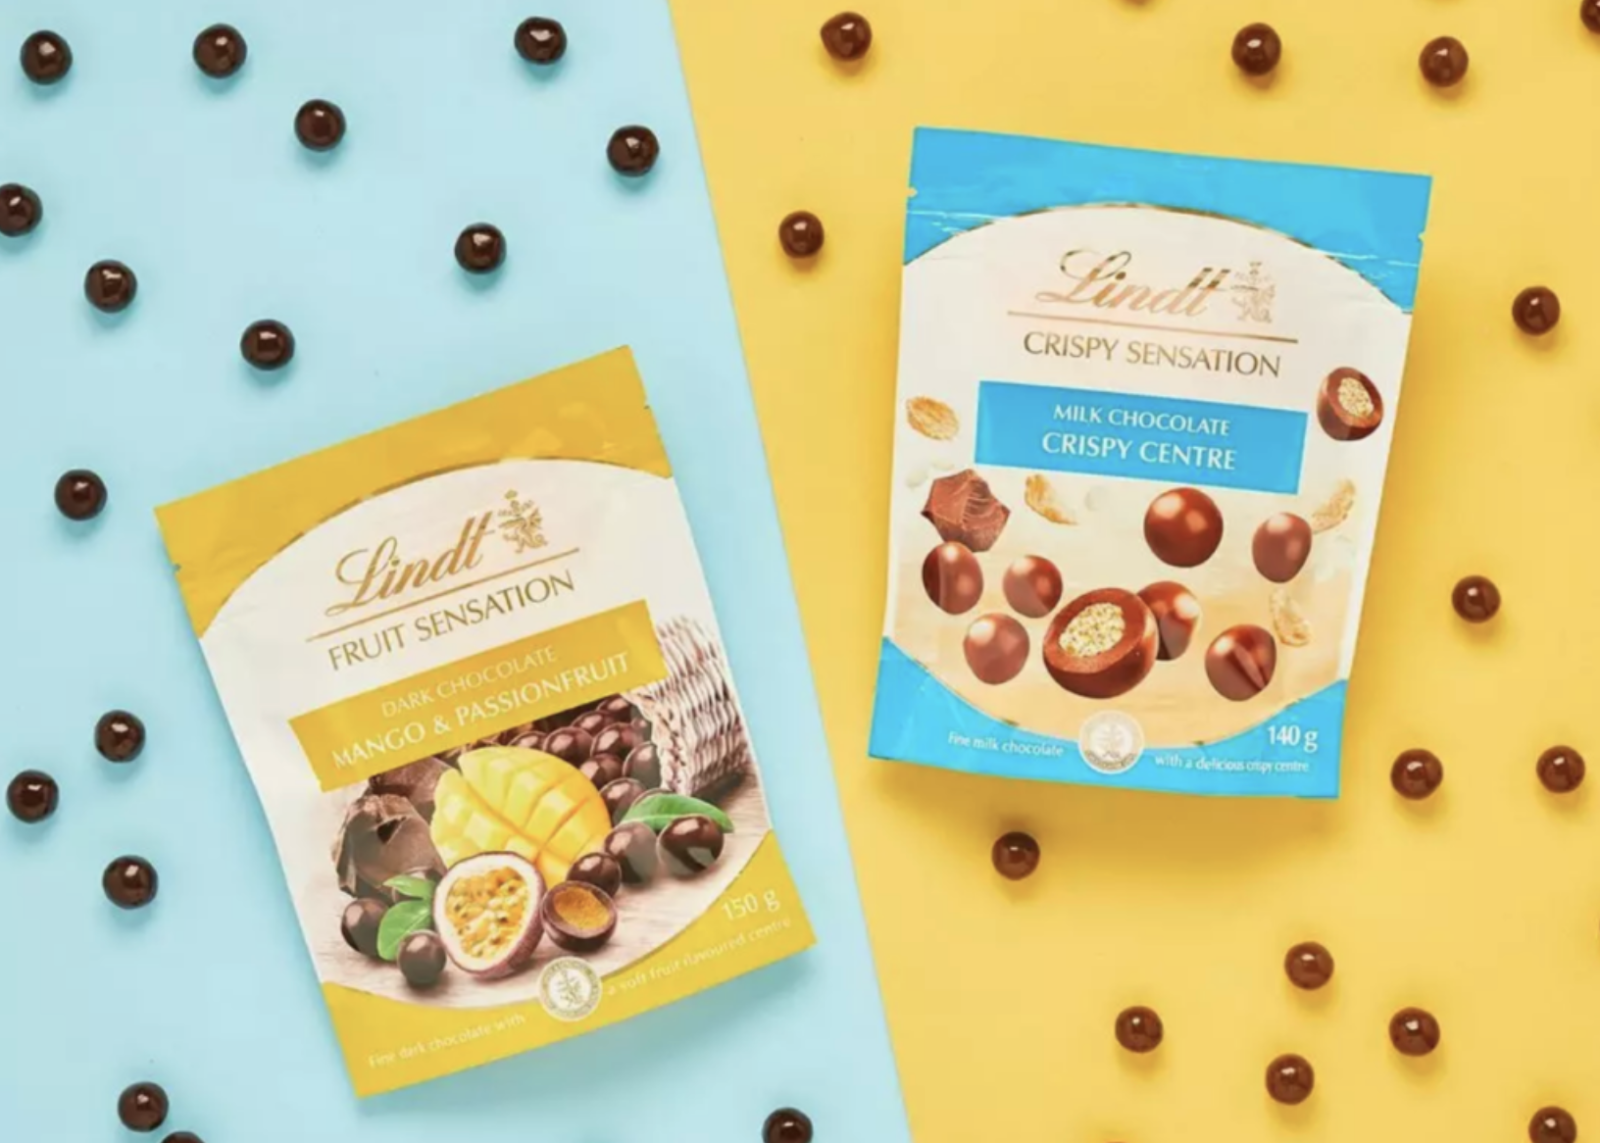 Lindt has just launched chocolate-covered crispy cereal balls, The Manc